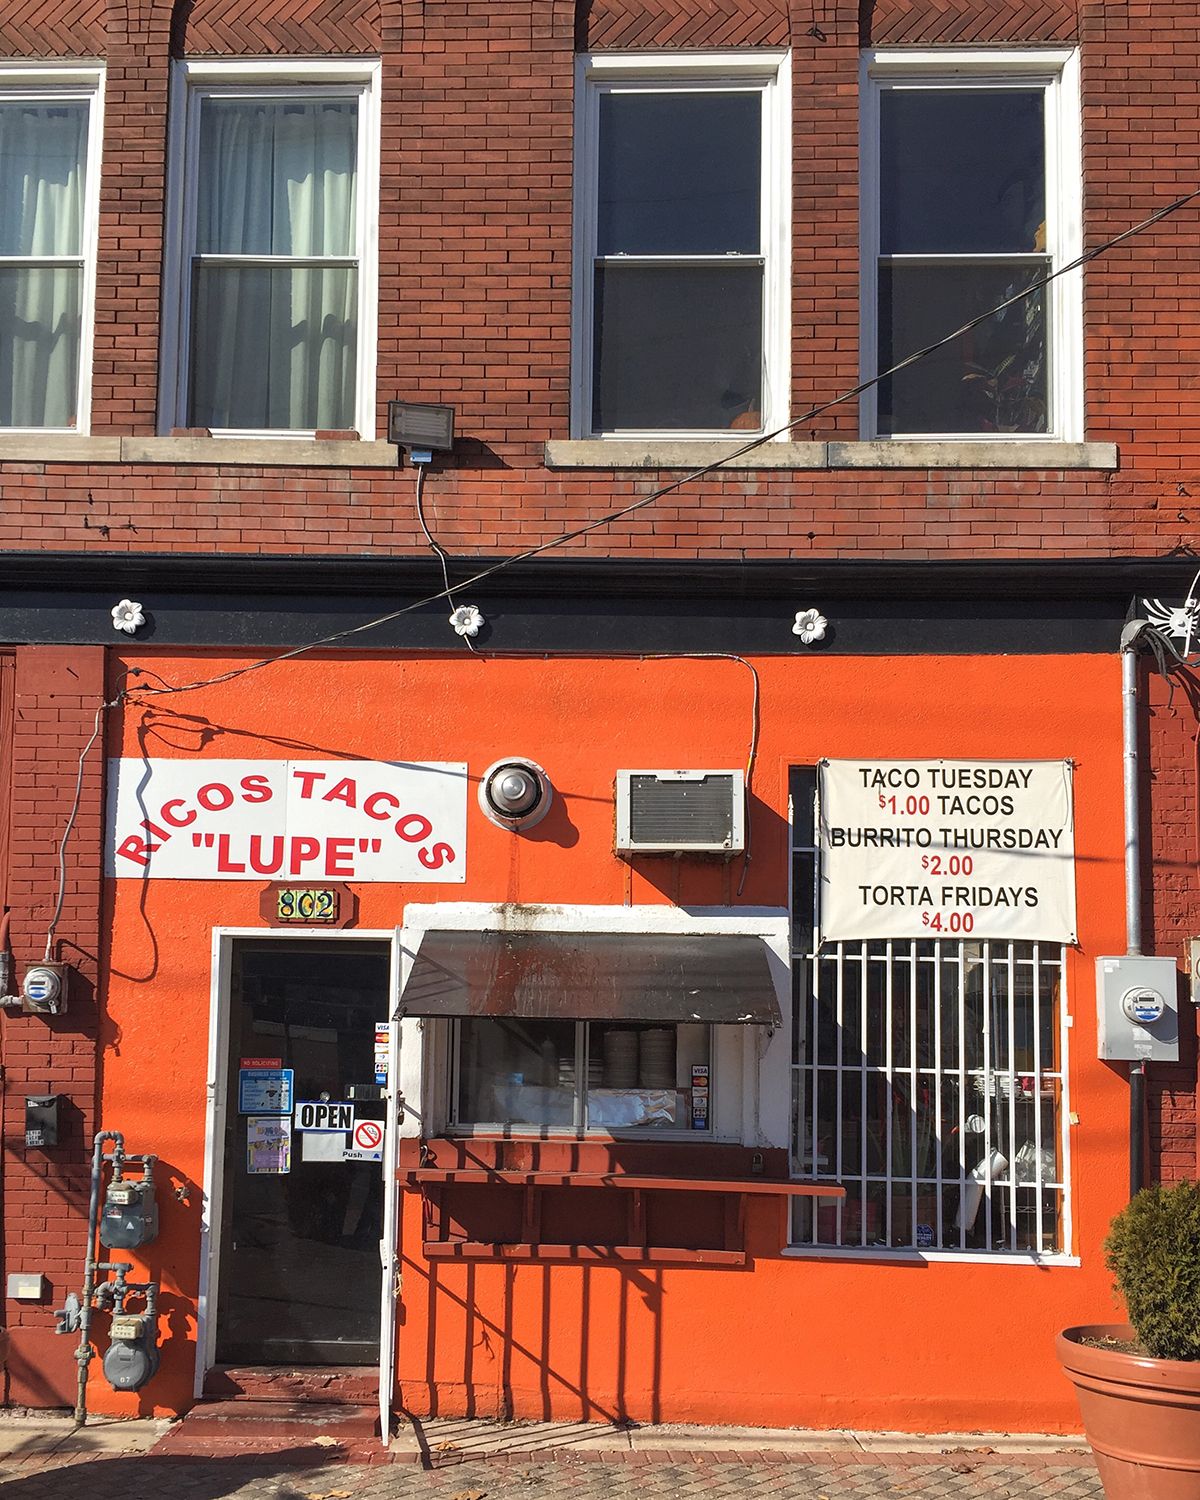 Ricos Tacos "Lupe"